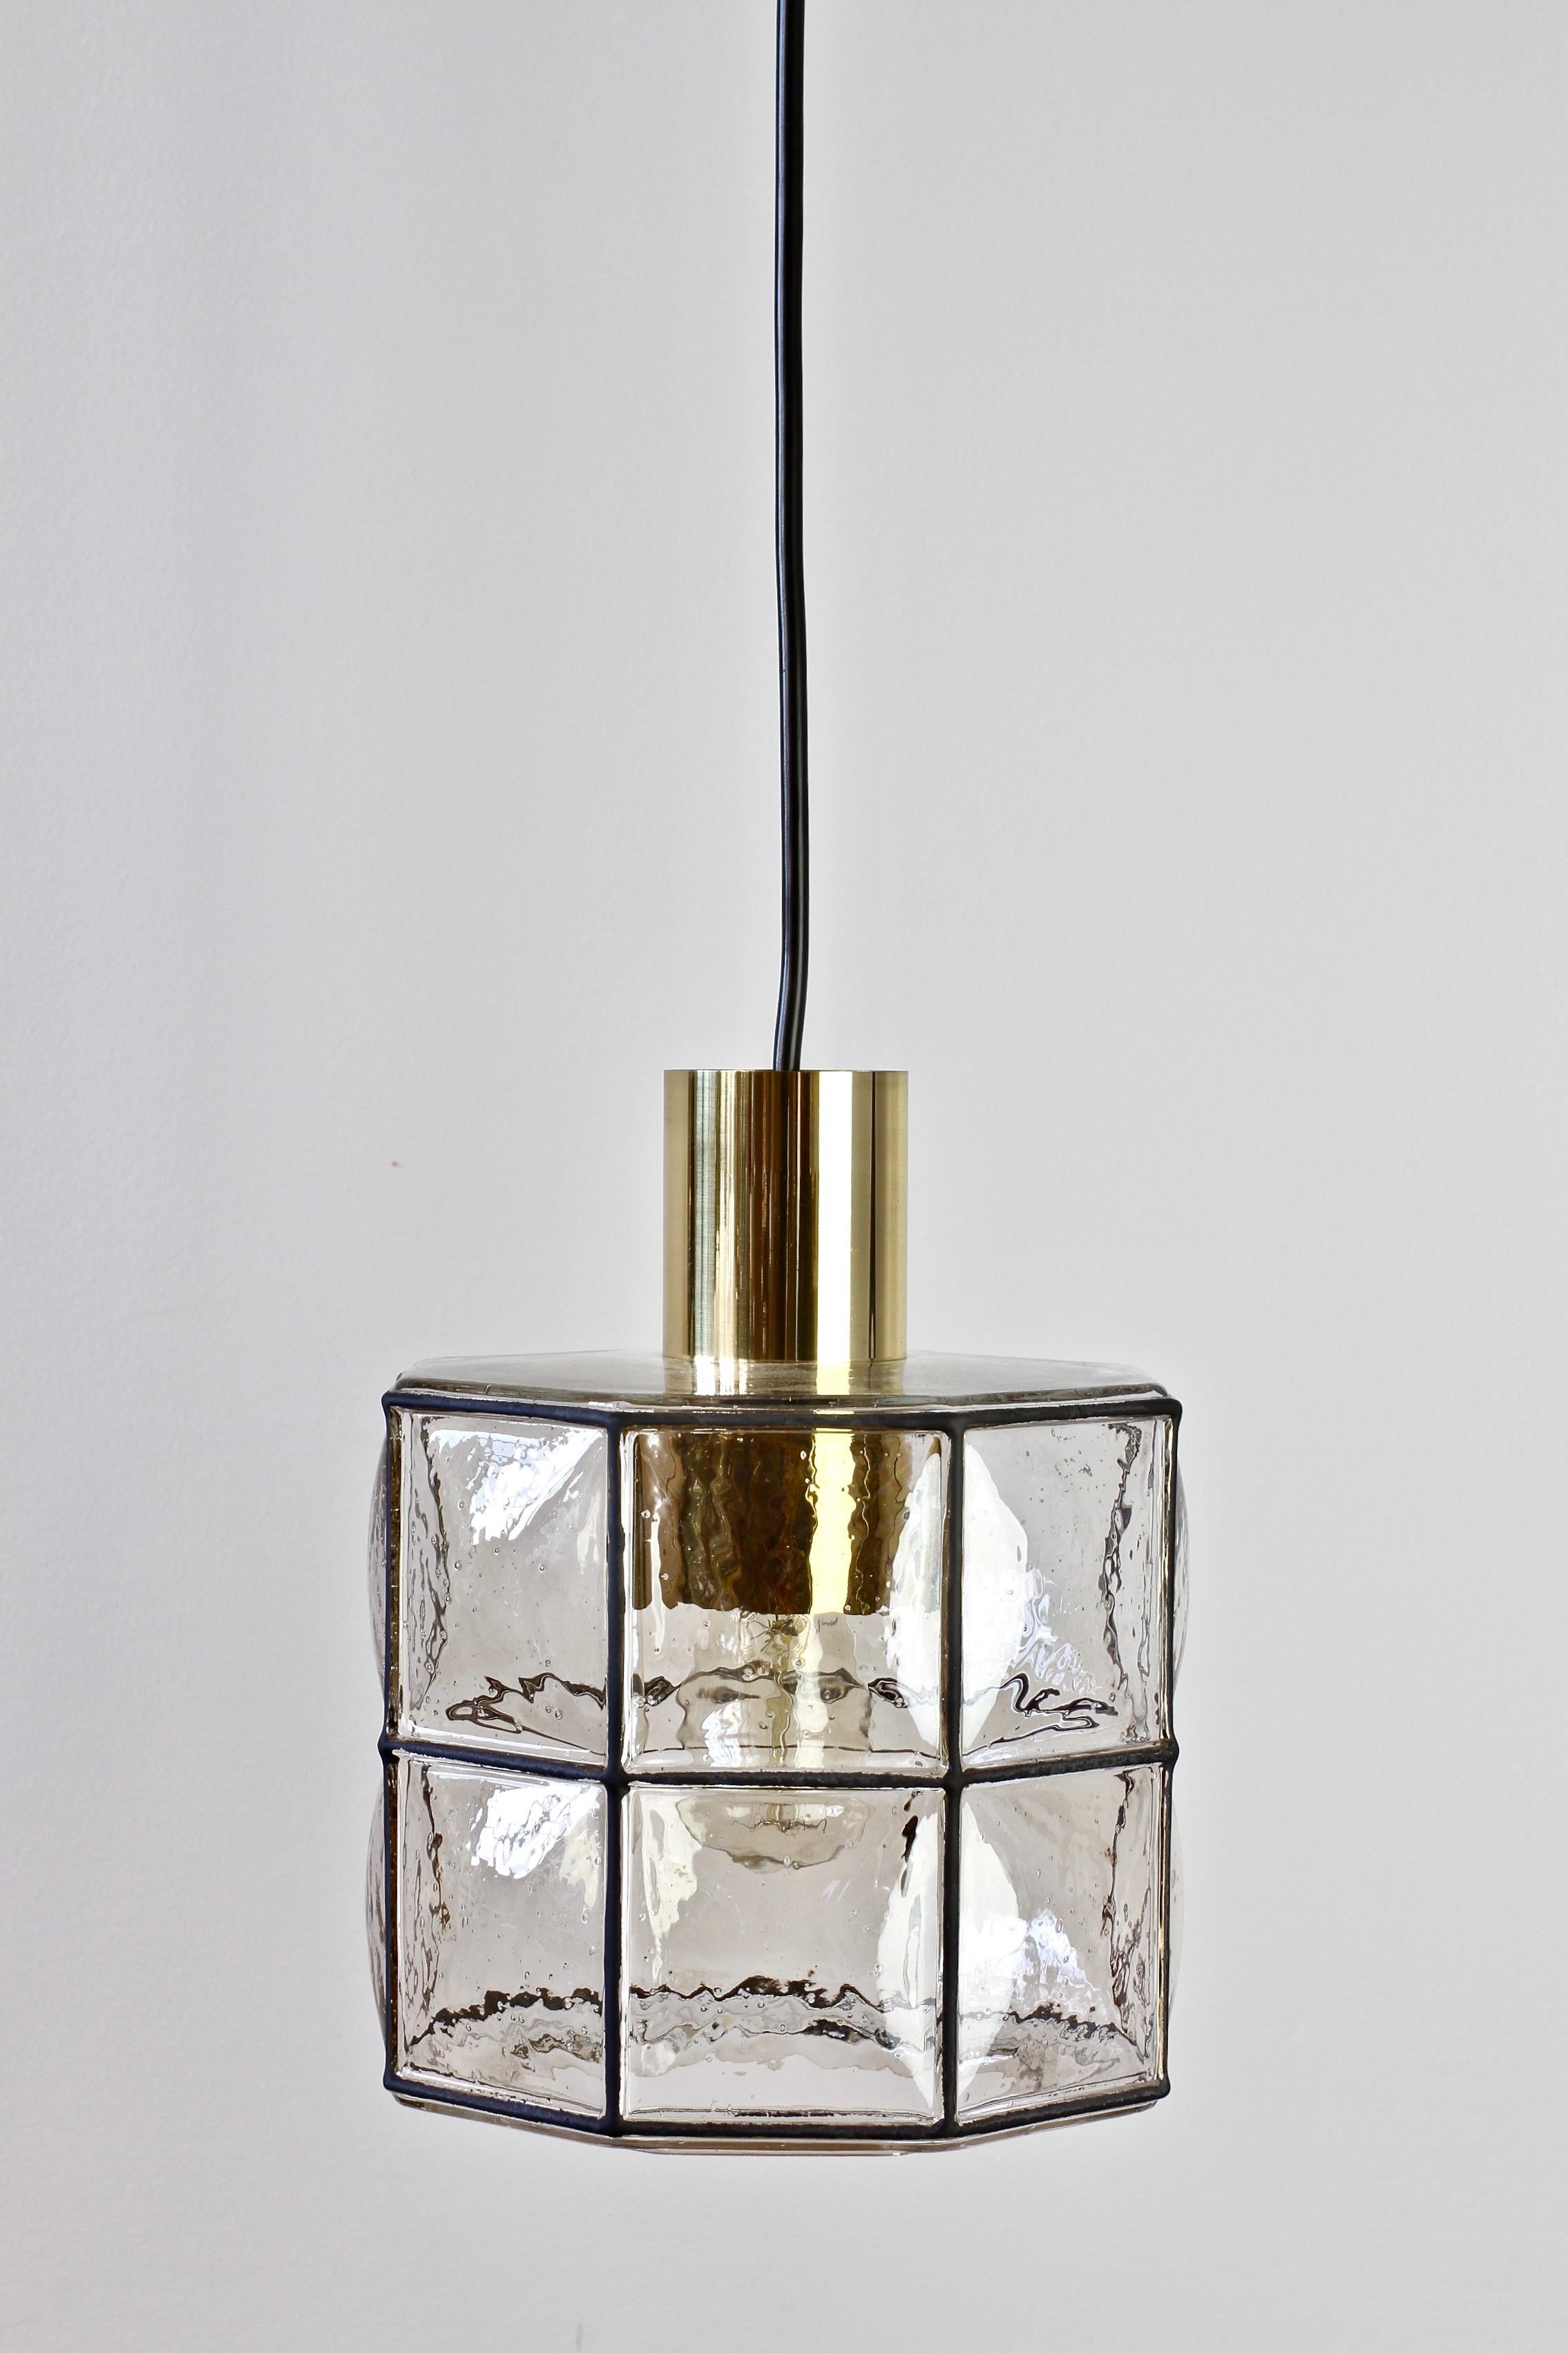 Limburg Glashutte (new old stock) minimal, geometric and simply shaped pendant lamp or light fixture made in Germany, circa 1965. The Pulegoso or 'bubble' glass bulges slightly out of the black 